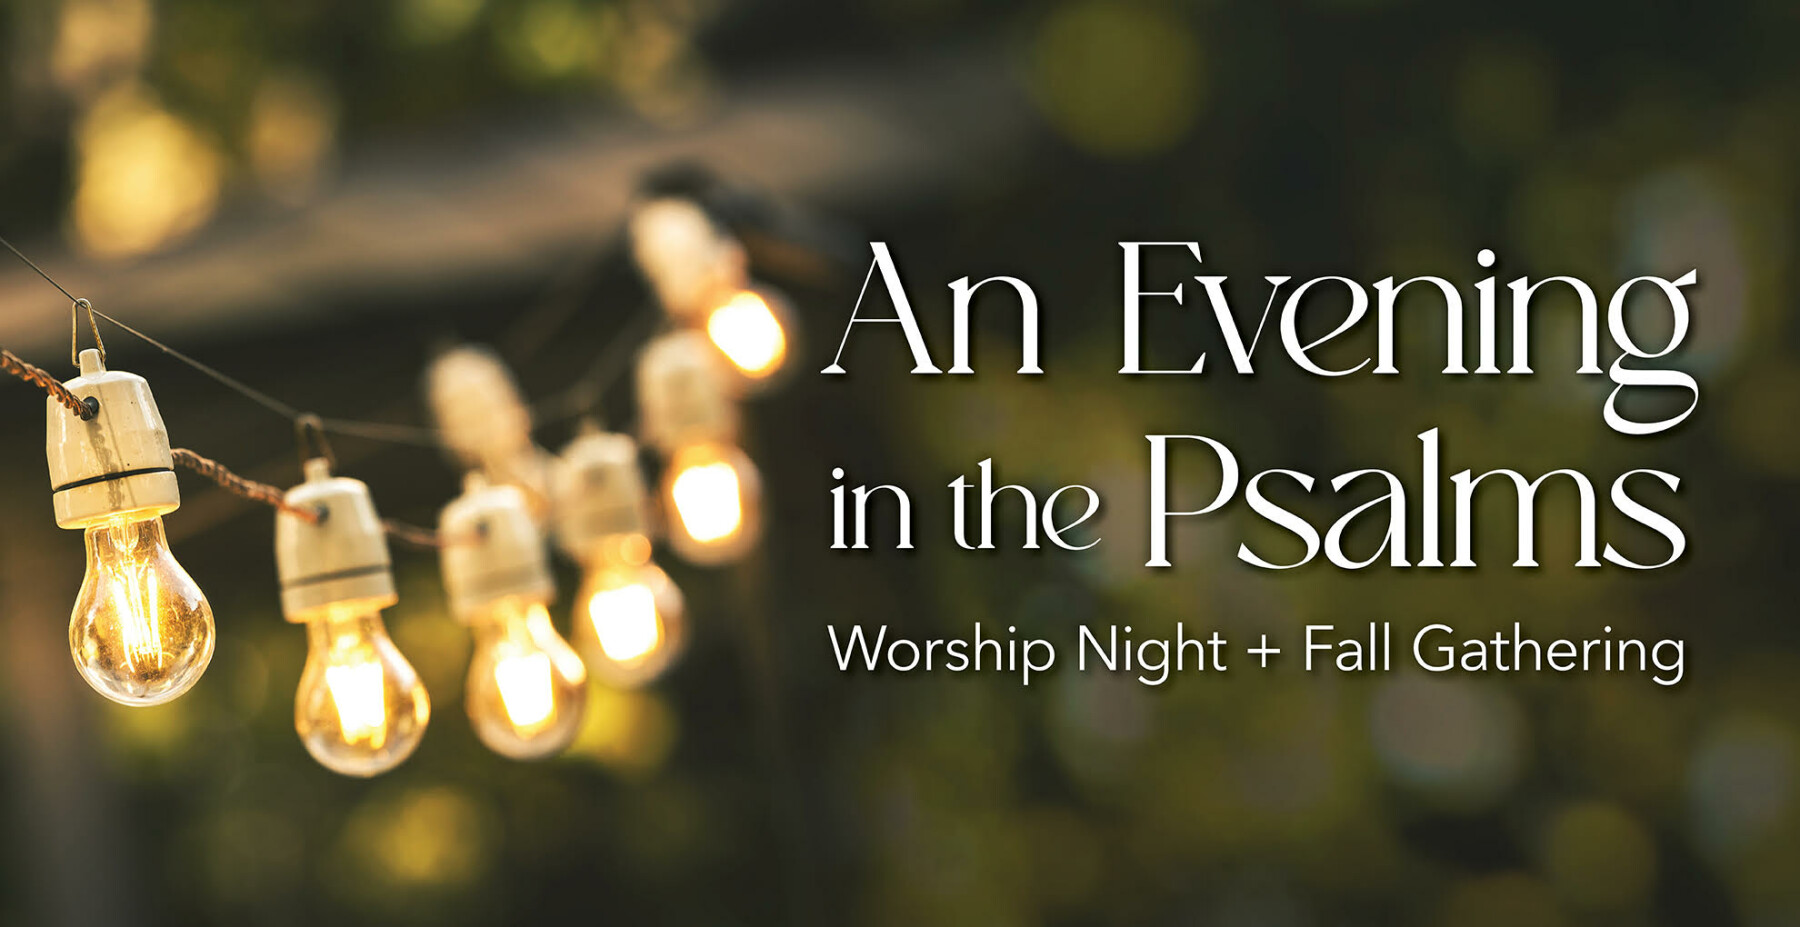 An Evening in the Psalms